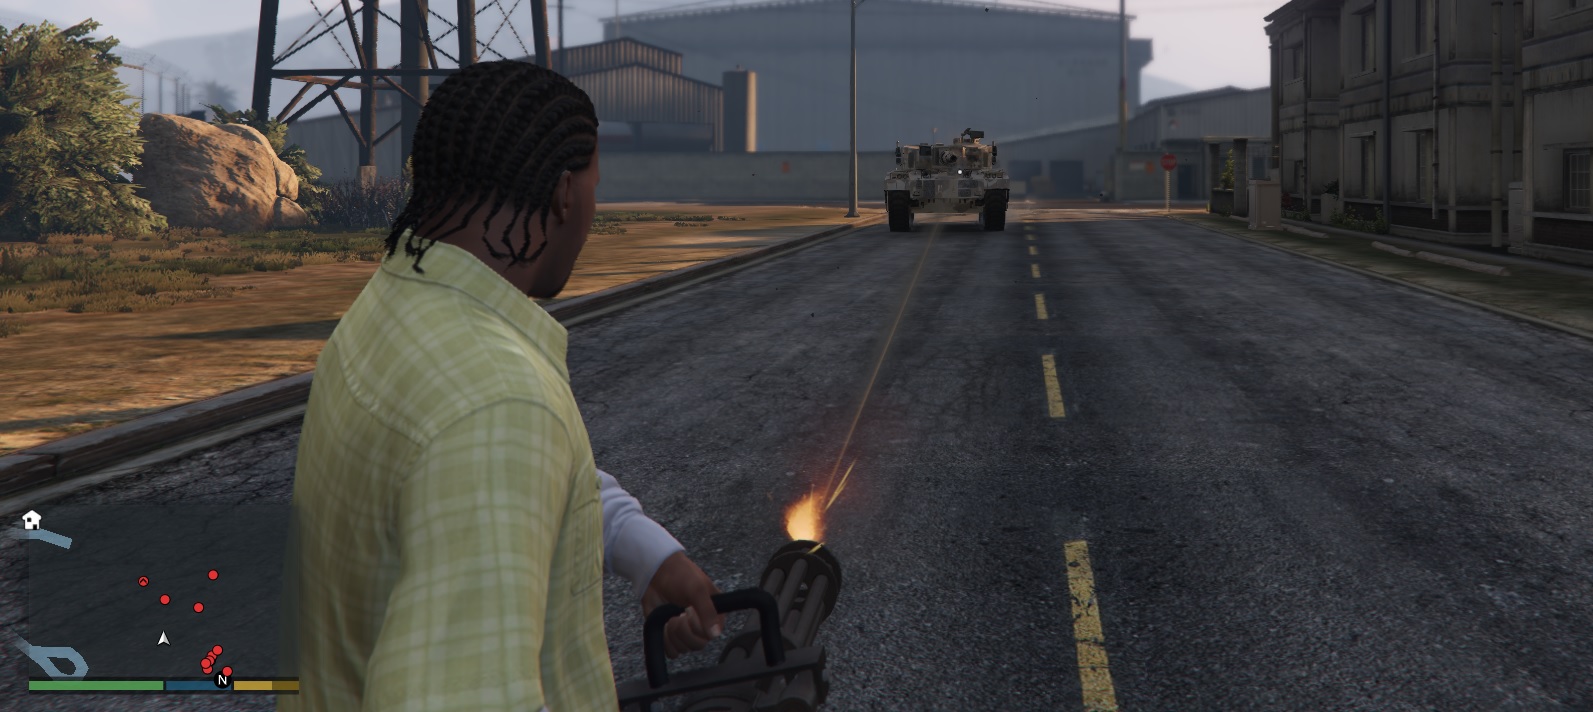 GTA 5: How To Get Rid of Weapons